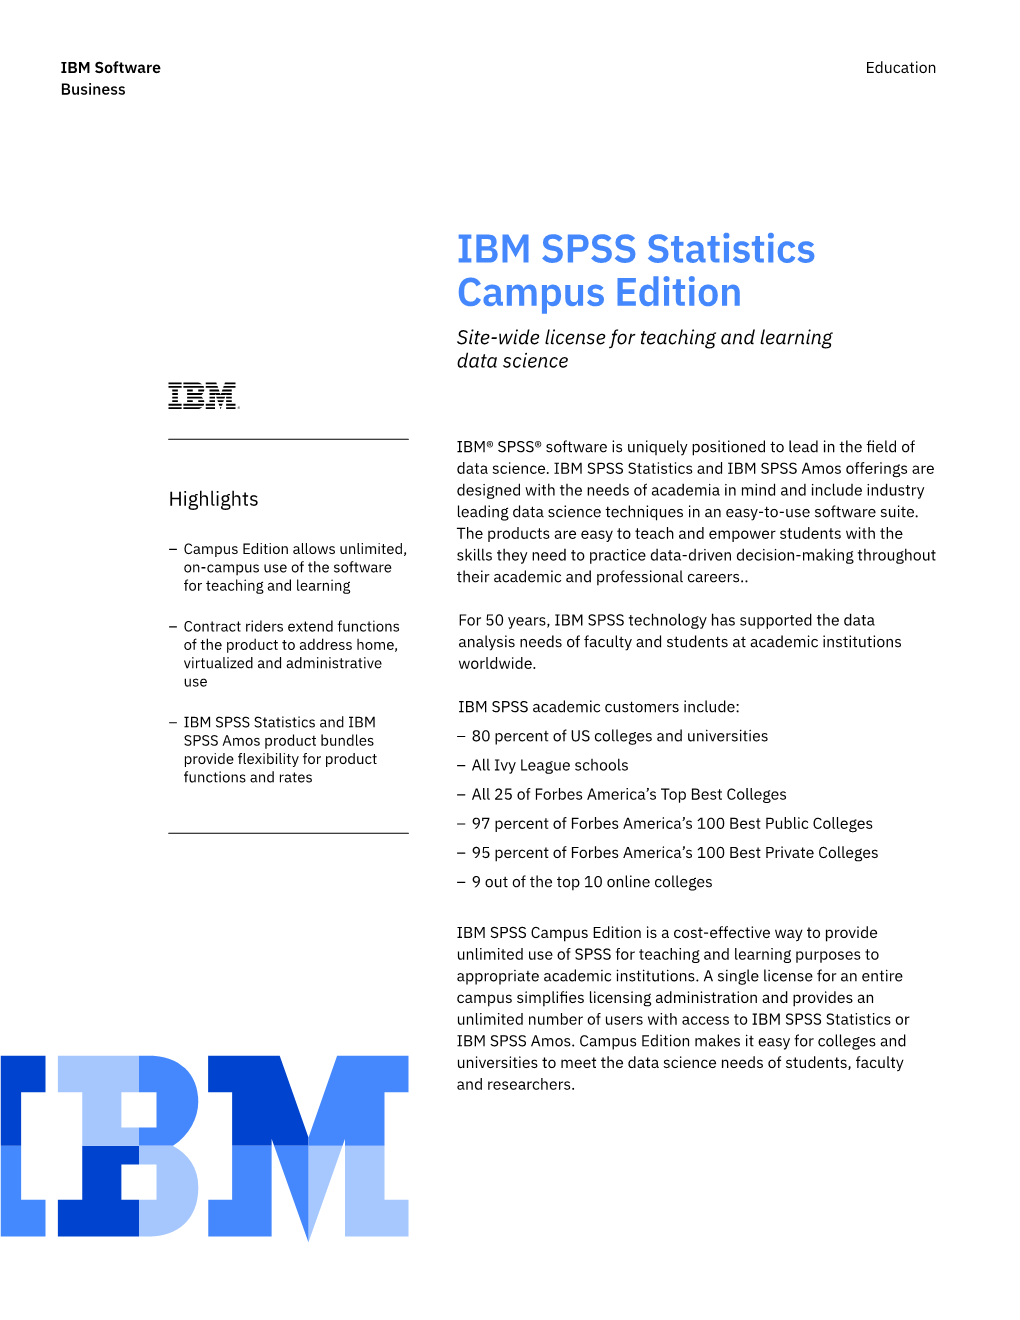 IBM SPSS Statistics Campus Edition Site-Wide License for Teaching and Learning Data Science